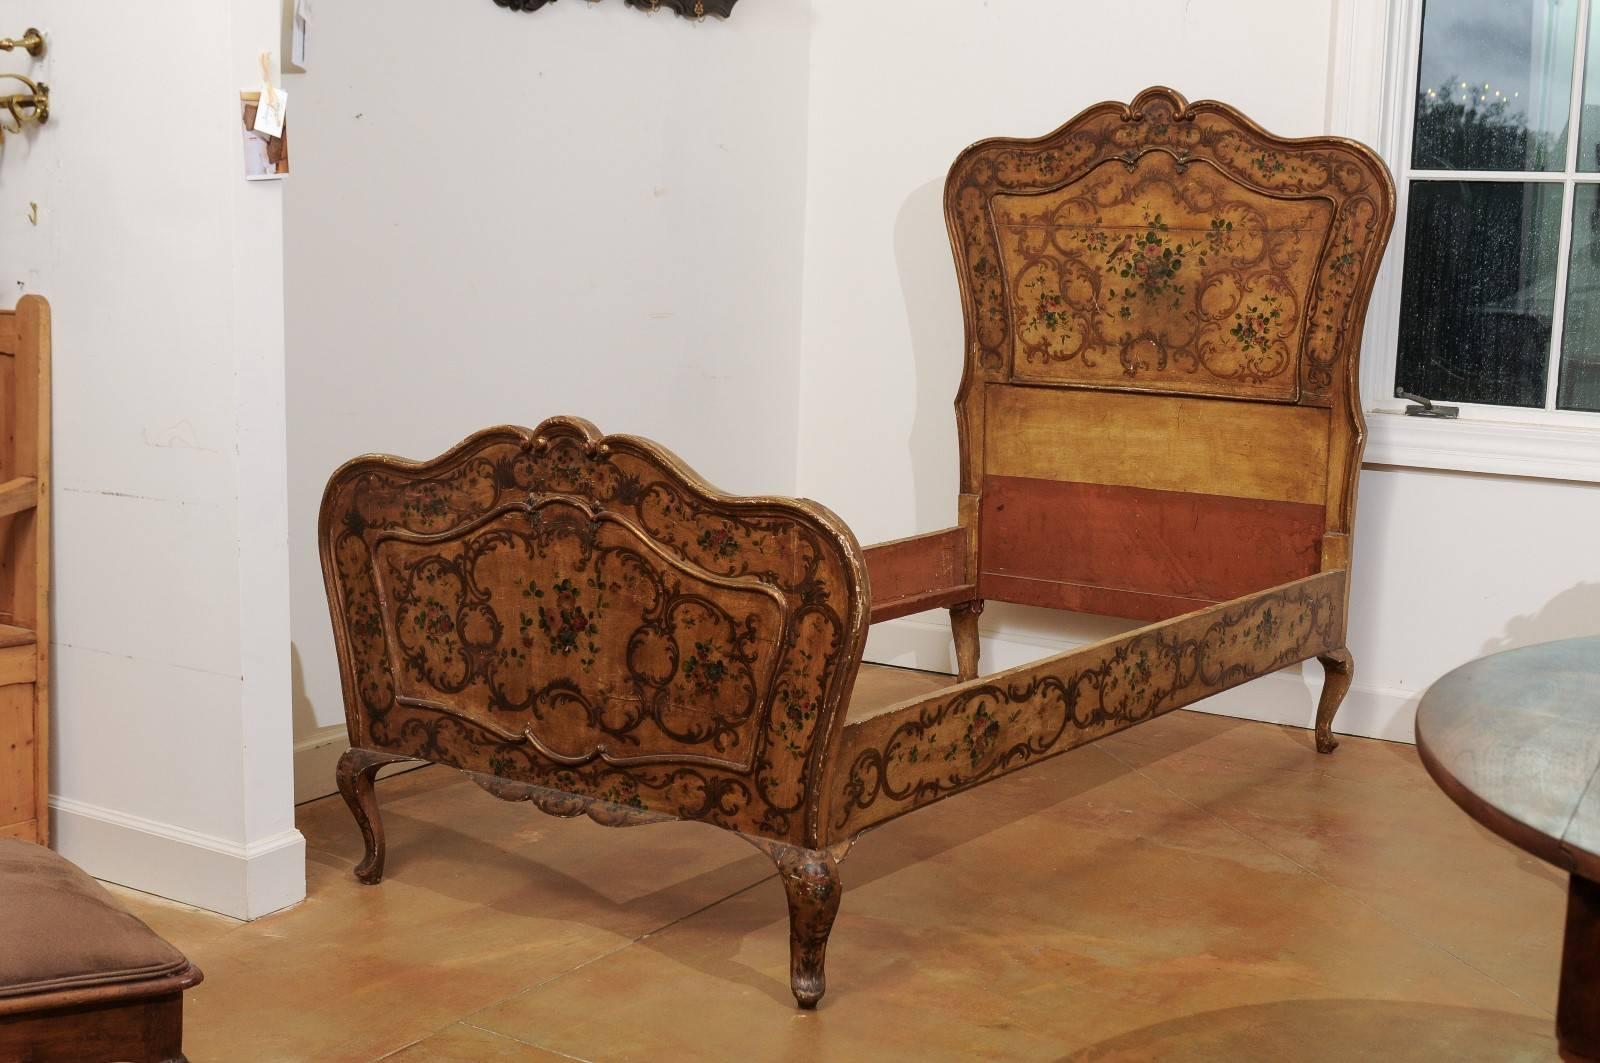 An Italian Rococo style twin XL bed frame with painted décor from the early 19th century. This Italian wooden bed frame features an exquisite curvy Silhouette, adorned with delicately arranged scrolls and floral motifs. The tan color is the perfect